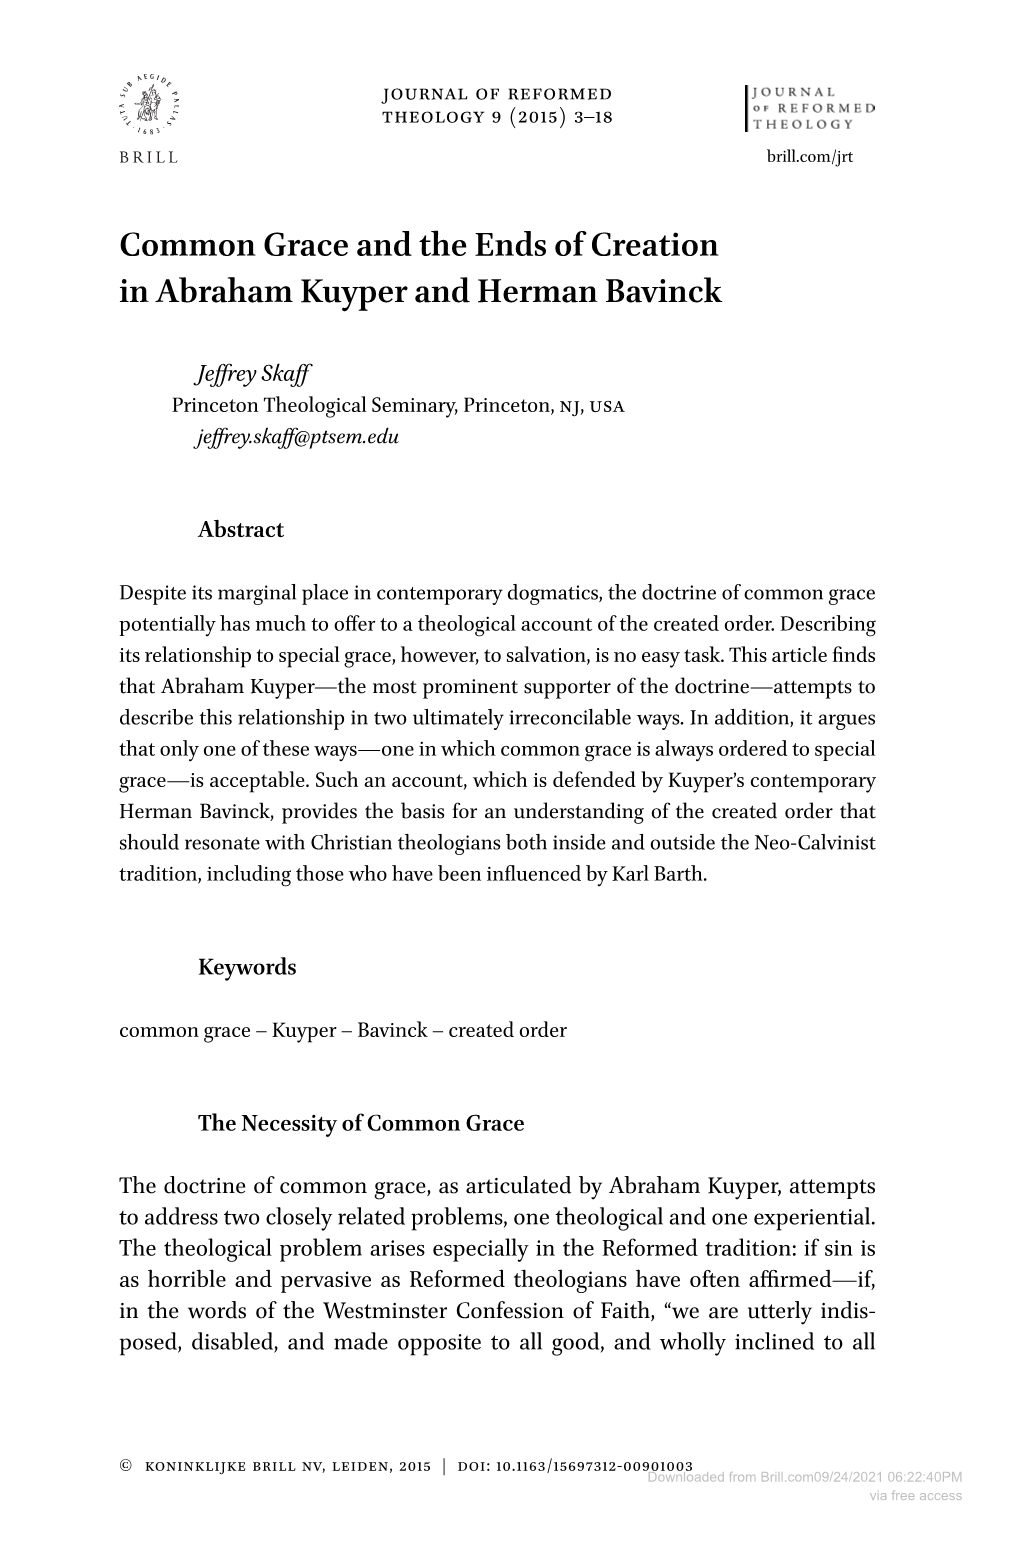 Common Grace and the Ends of Creation in Abraham Kuyper and Herman Bavinck